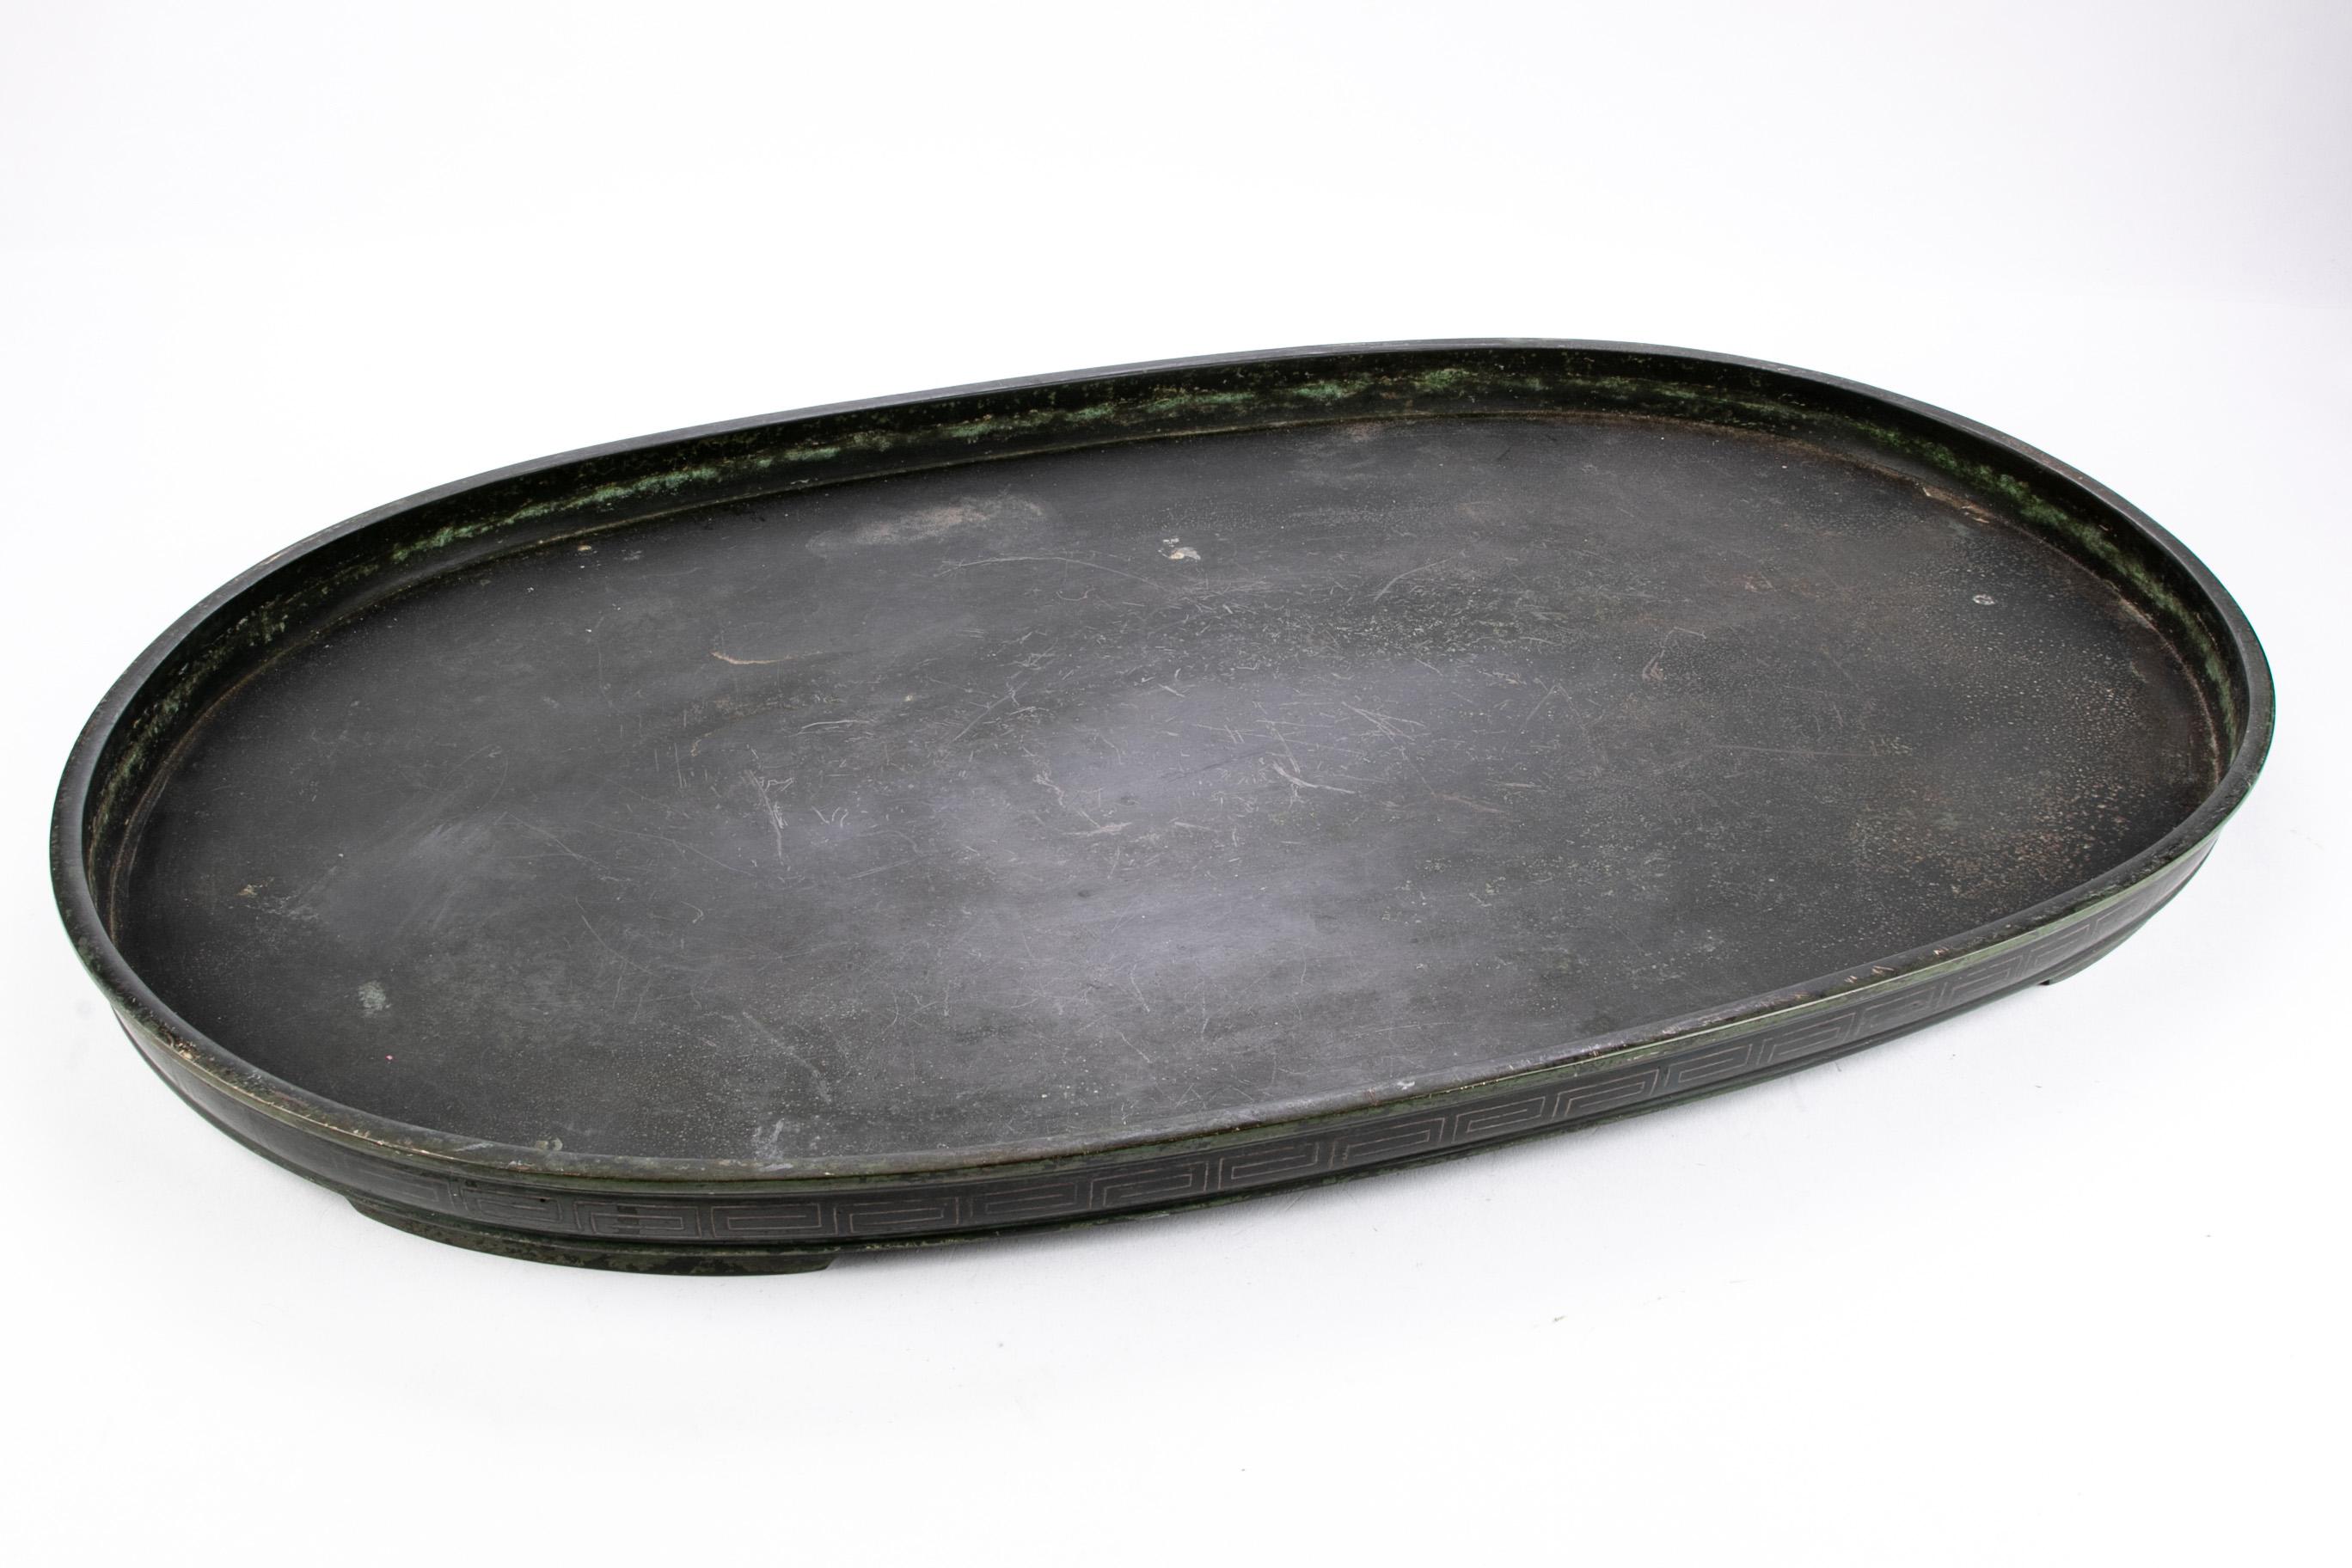 Antique Meiji period Japanese silver inlaid bronze Ikebana tray, oblong, inlaid geometric pattern along sides. Fine traditional form and style. 

Condition: Expected signs of wear and use including some surface scratching.
 